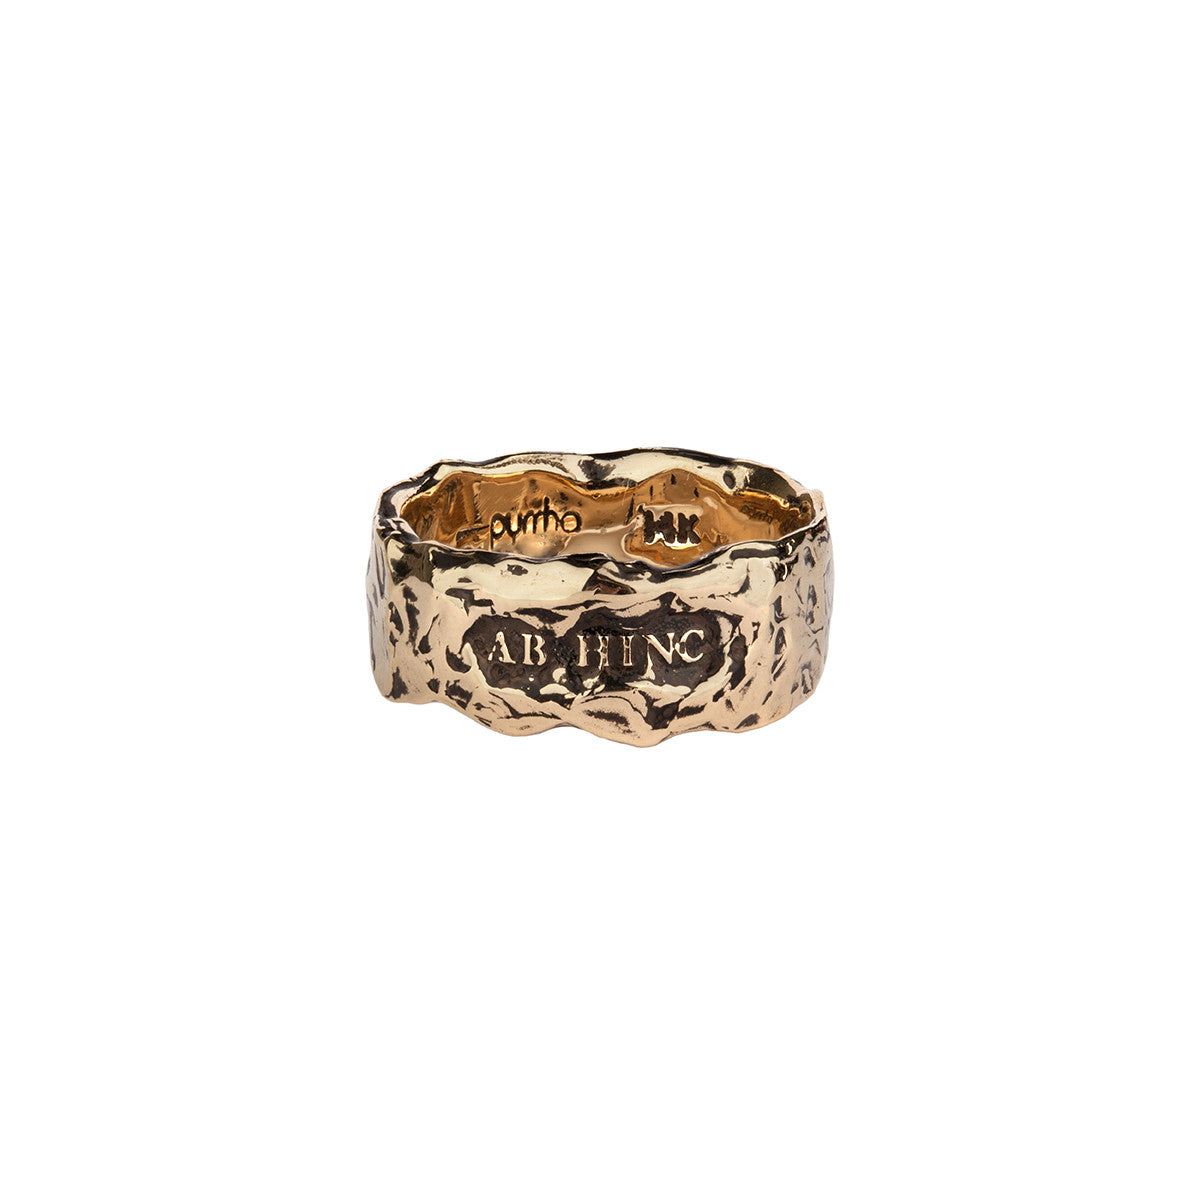 A wide 14k gold textured ring featuring the words From Here On printed on the band.